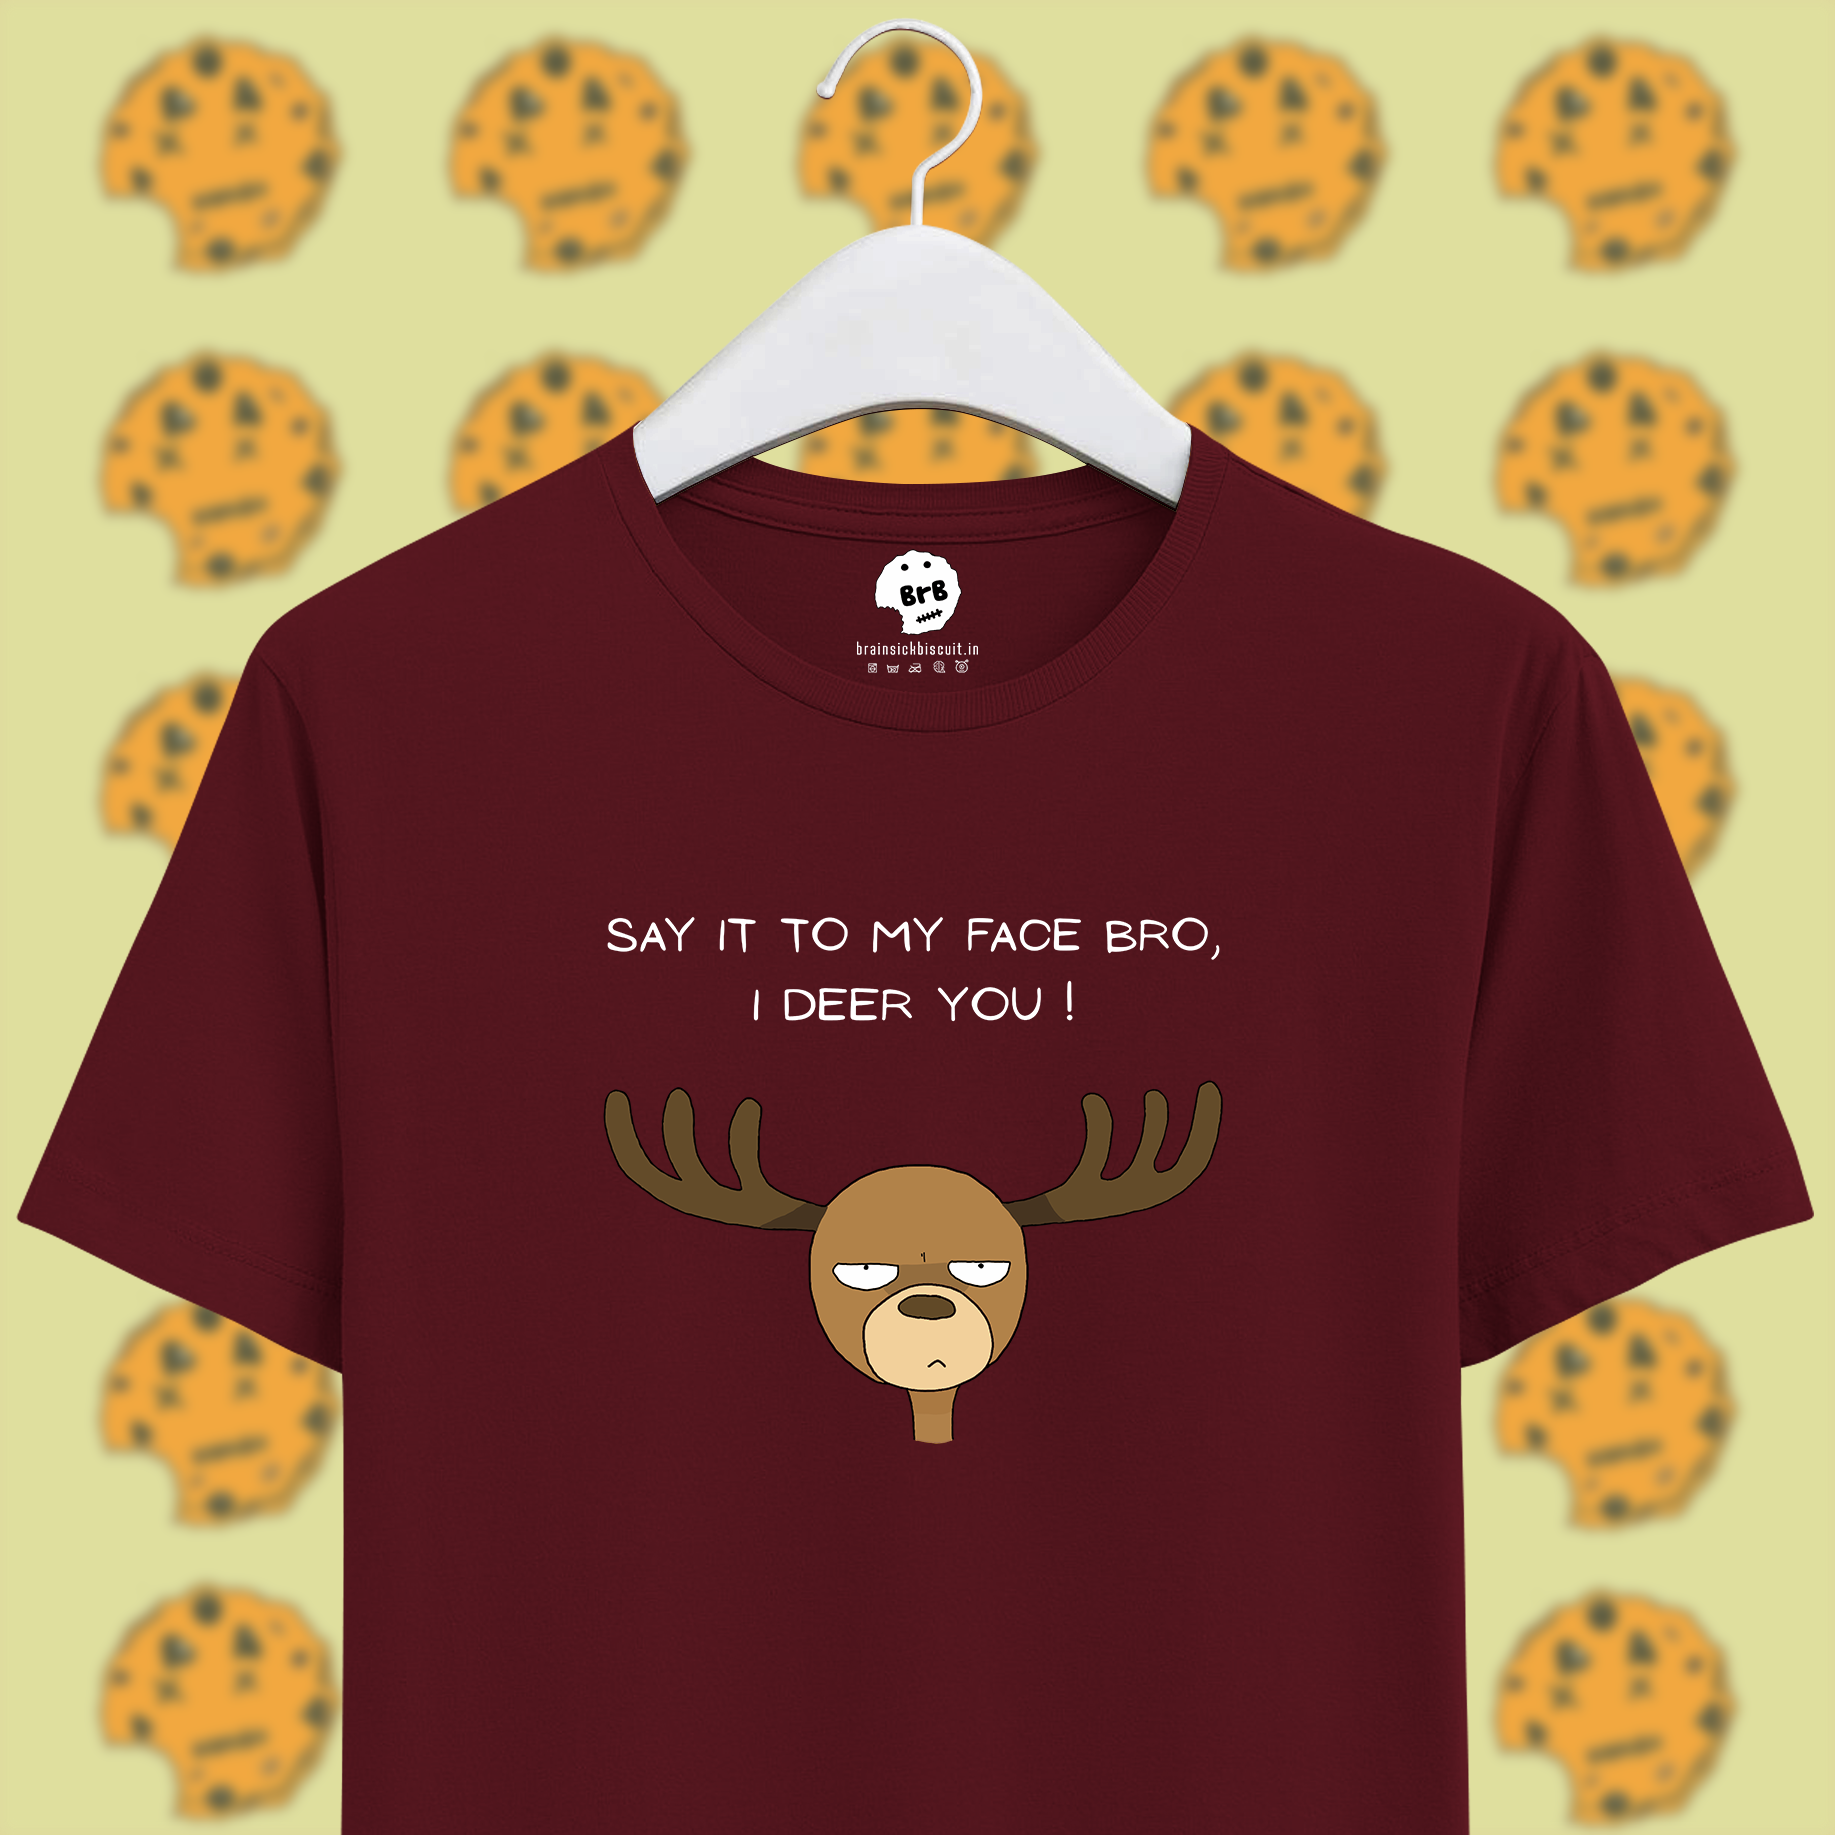 deer pun with say it to my face bro, i deer you text on unisex maroon half sleeves t-shirt.